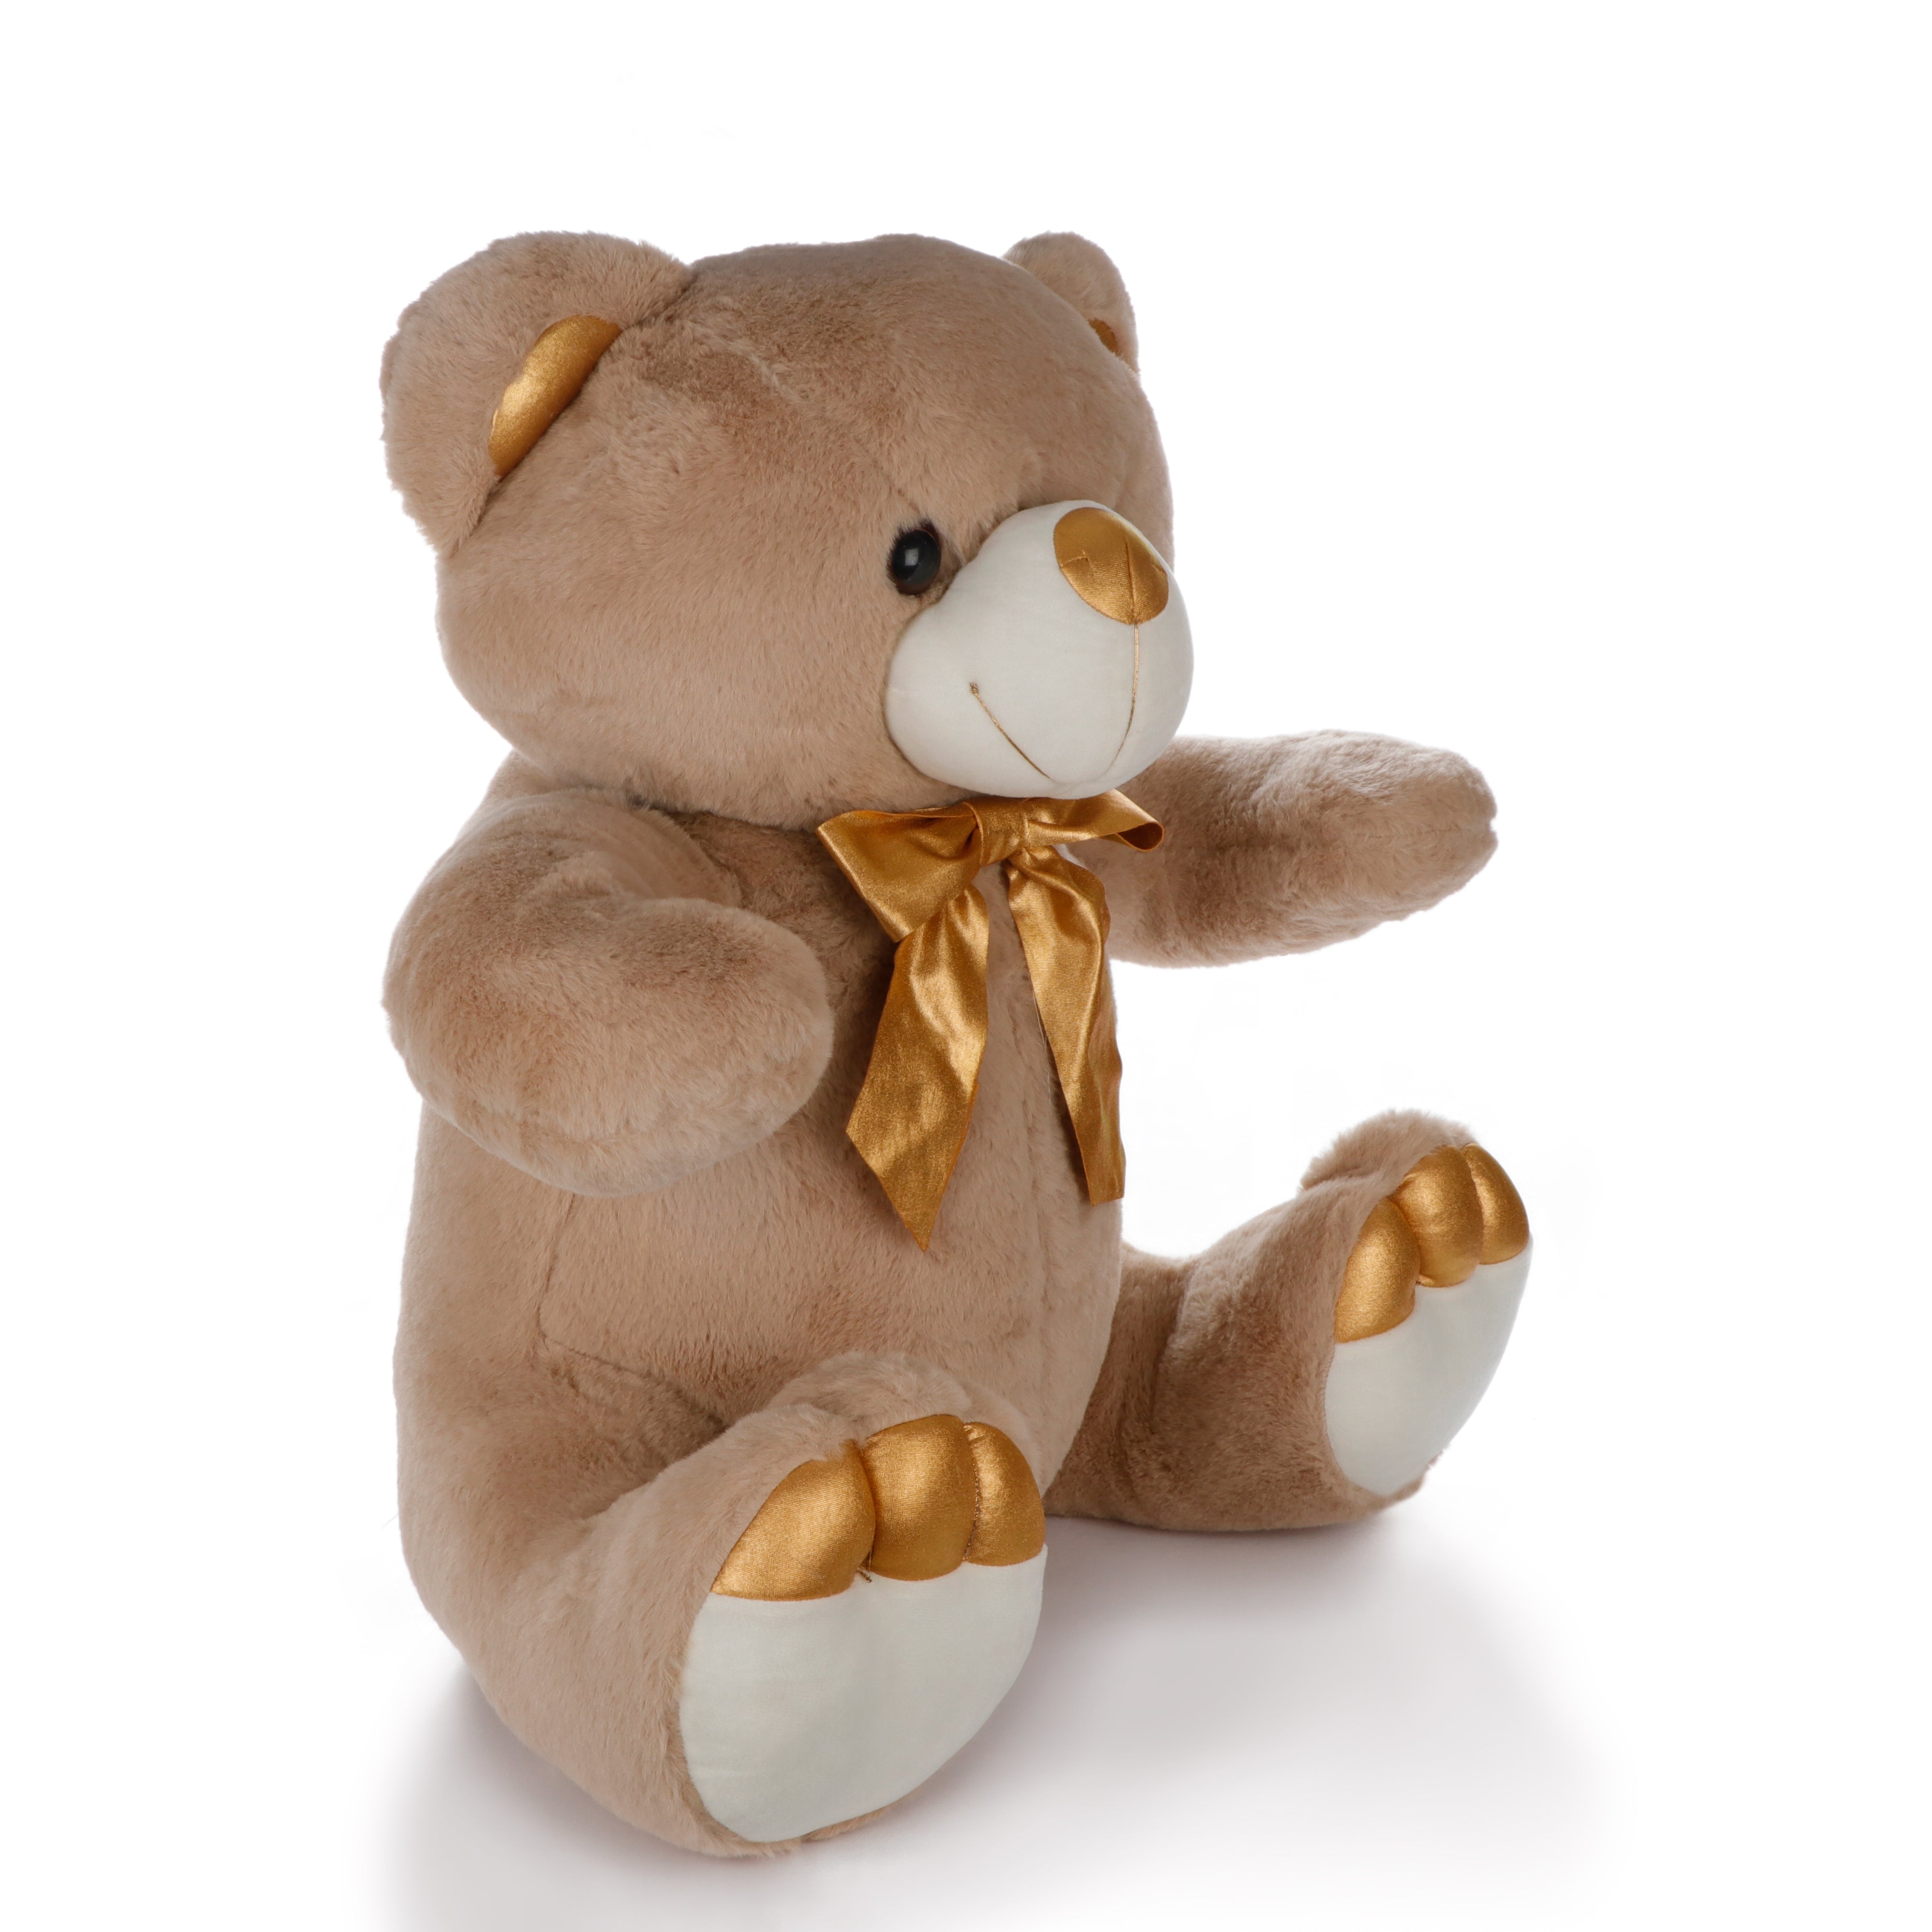 Archies | Archies Soft Toys, Teddy Bear For Girls, Soft Toys Boyfriend, Husband For Kids, Birthday Gift For Girls,Wife,   Brown Teddy Bear with Golden Paws - 55CM 1